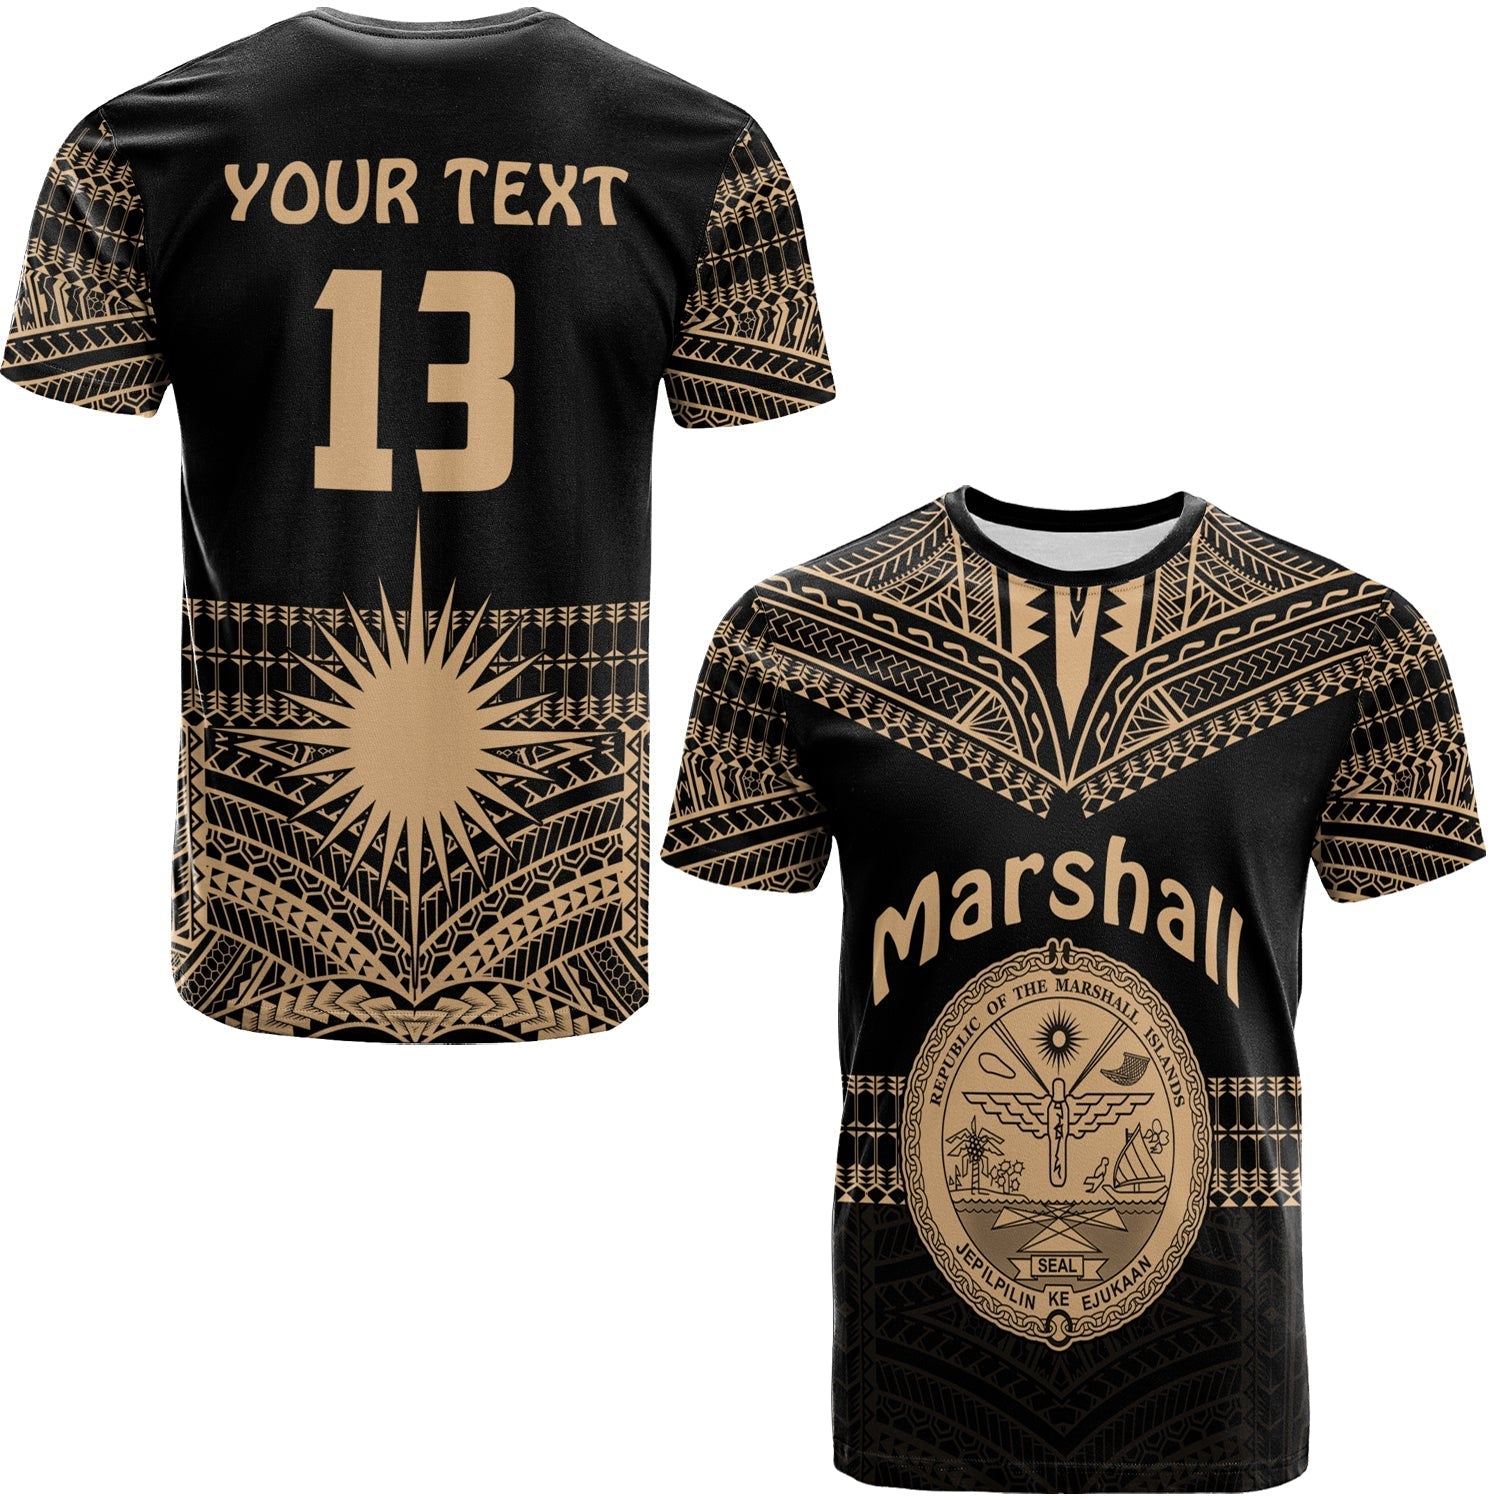 custom-text-and-number-marshall-islands-t-shirt-best-tattoo-version-golden